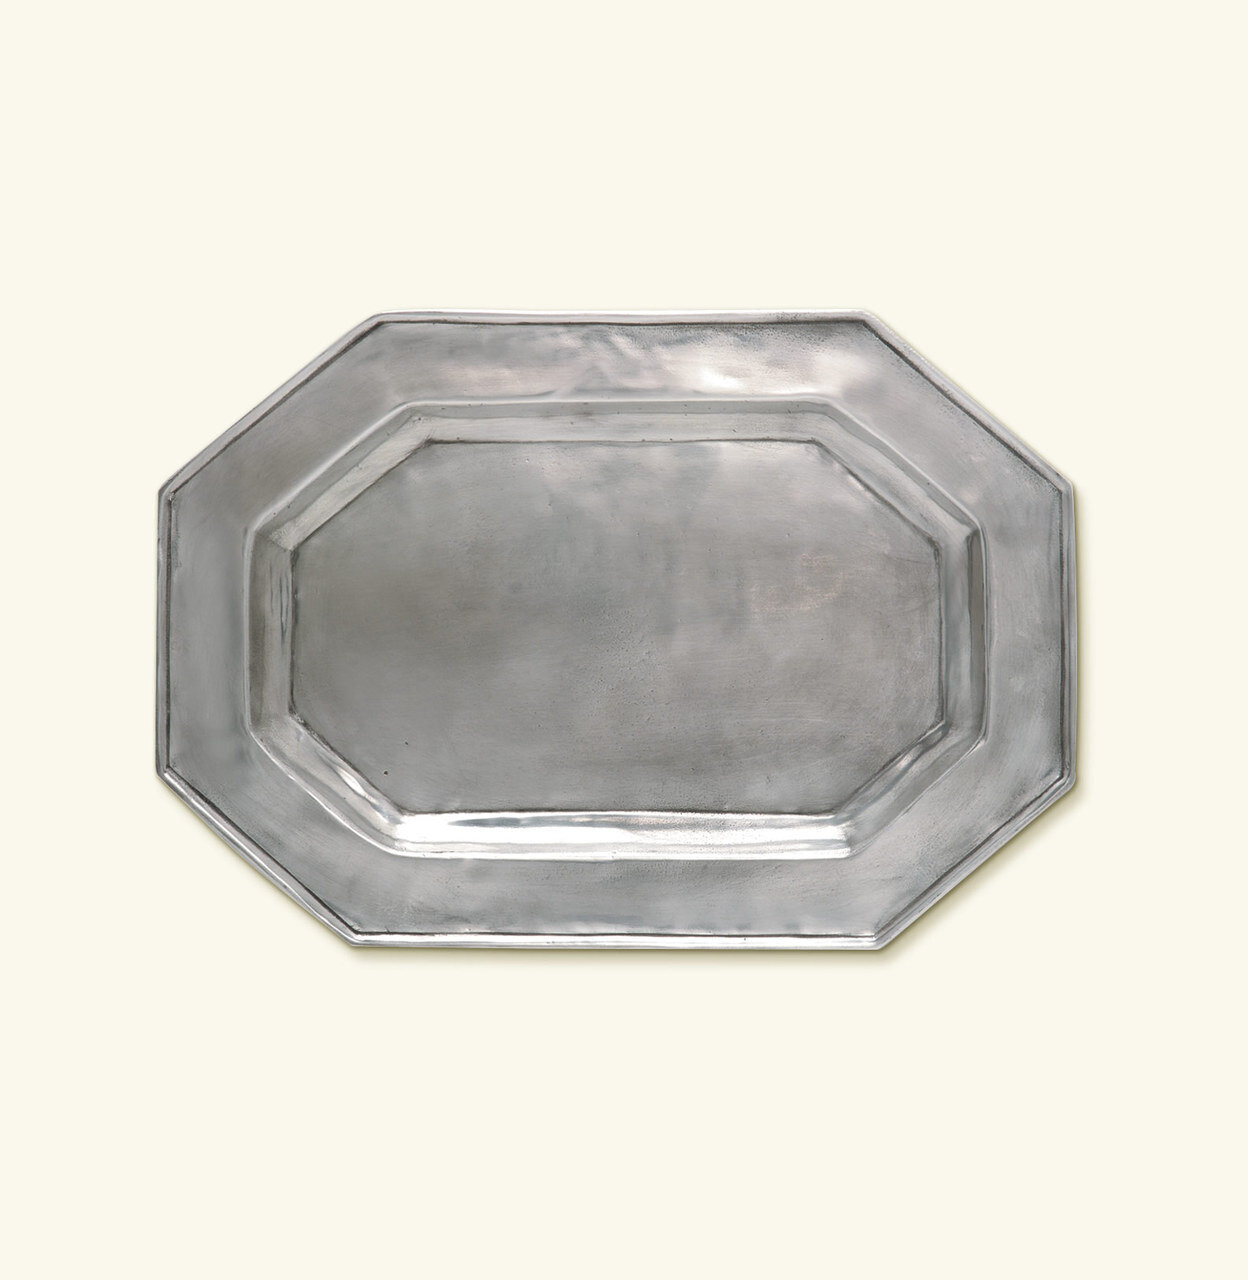 Match Pewter Octagonal Tray For Tureen 740